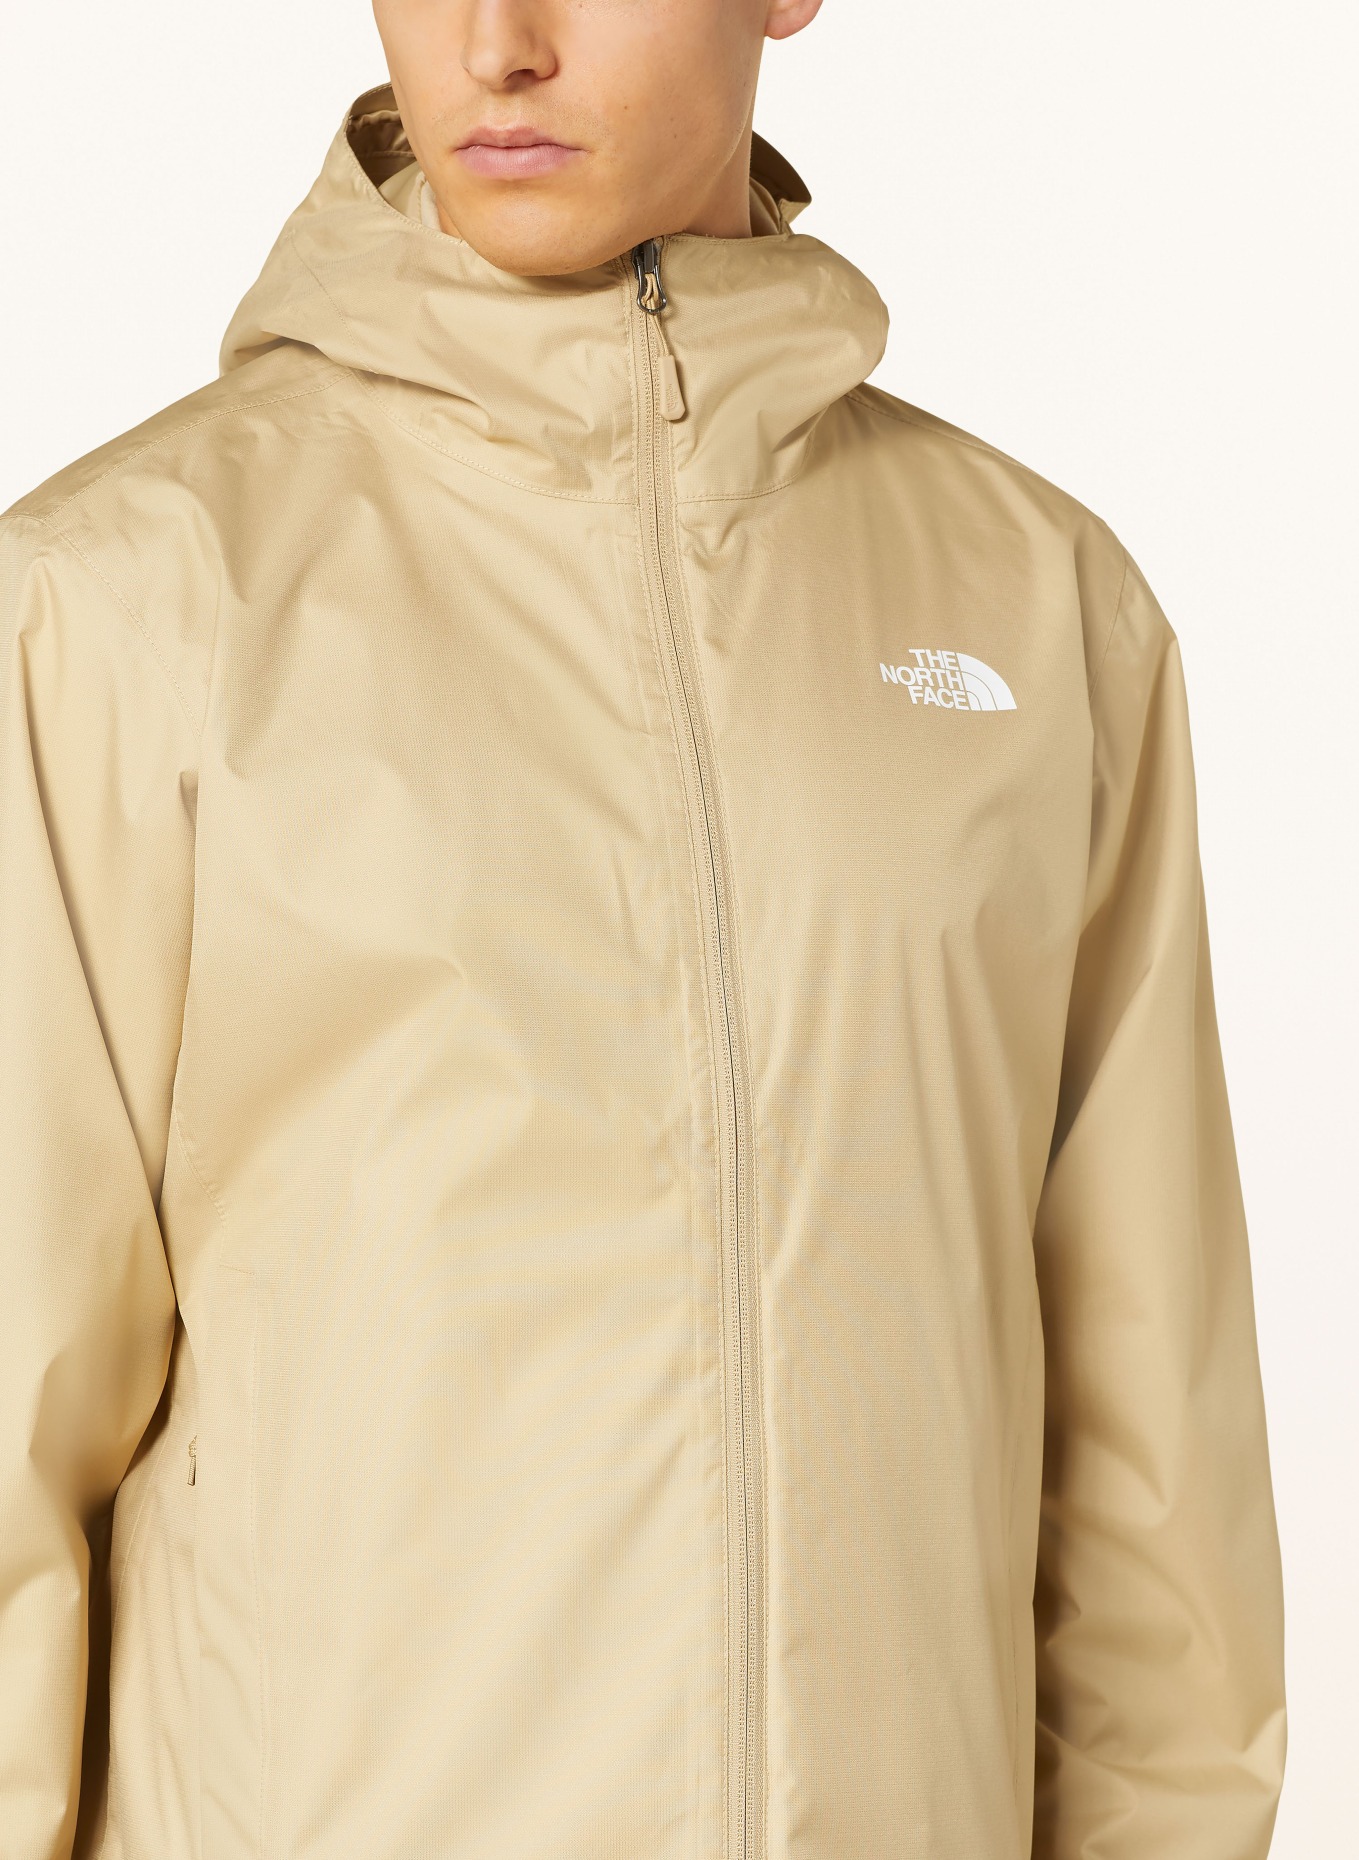 THE NORTH FACE Funktionsjacke QUEST, Farbe: DUNKELGELB (Bild 5)